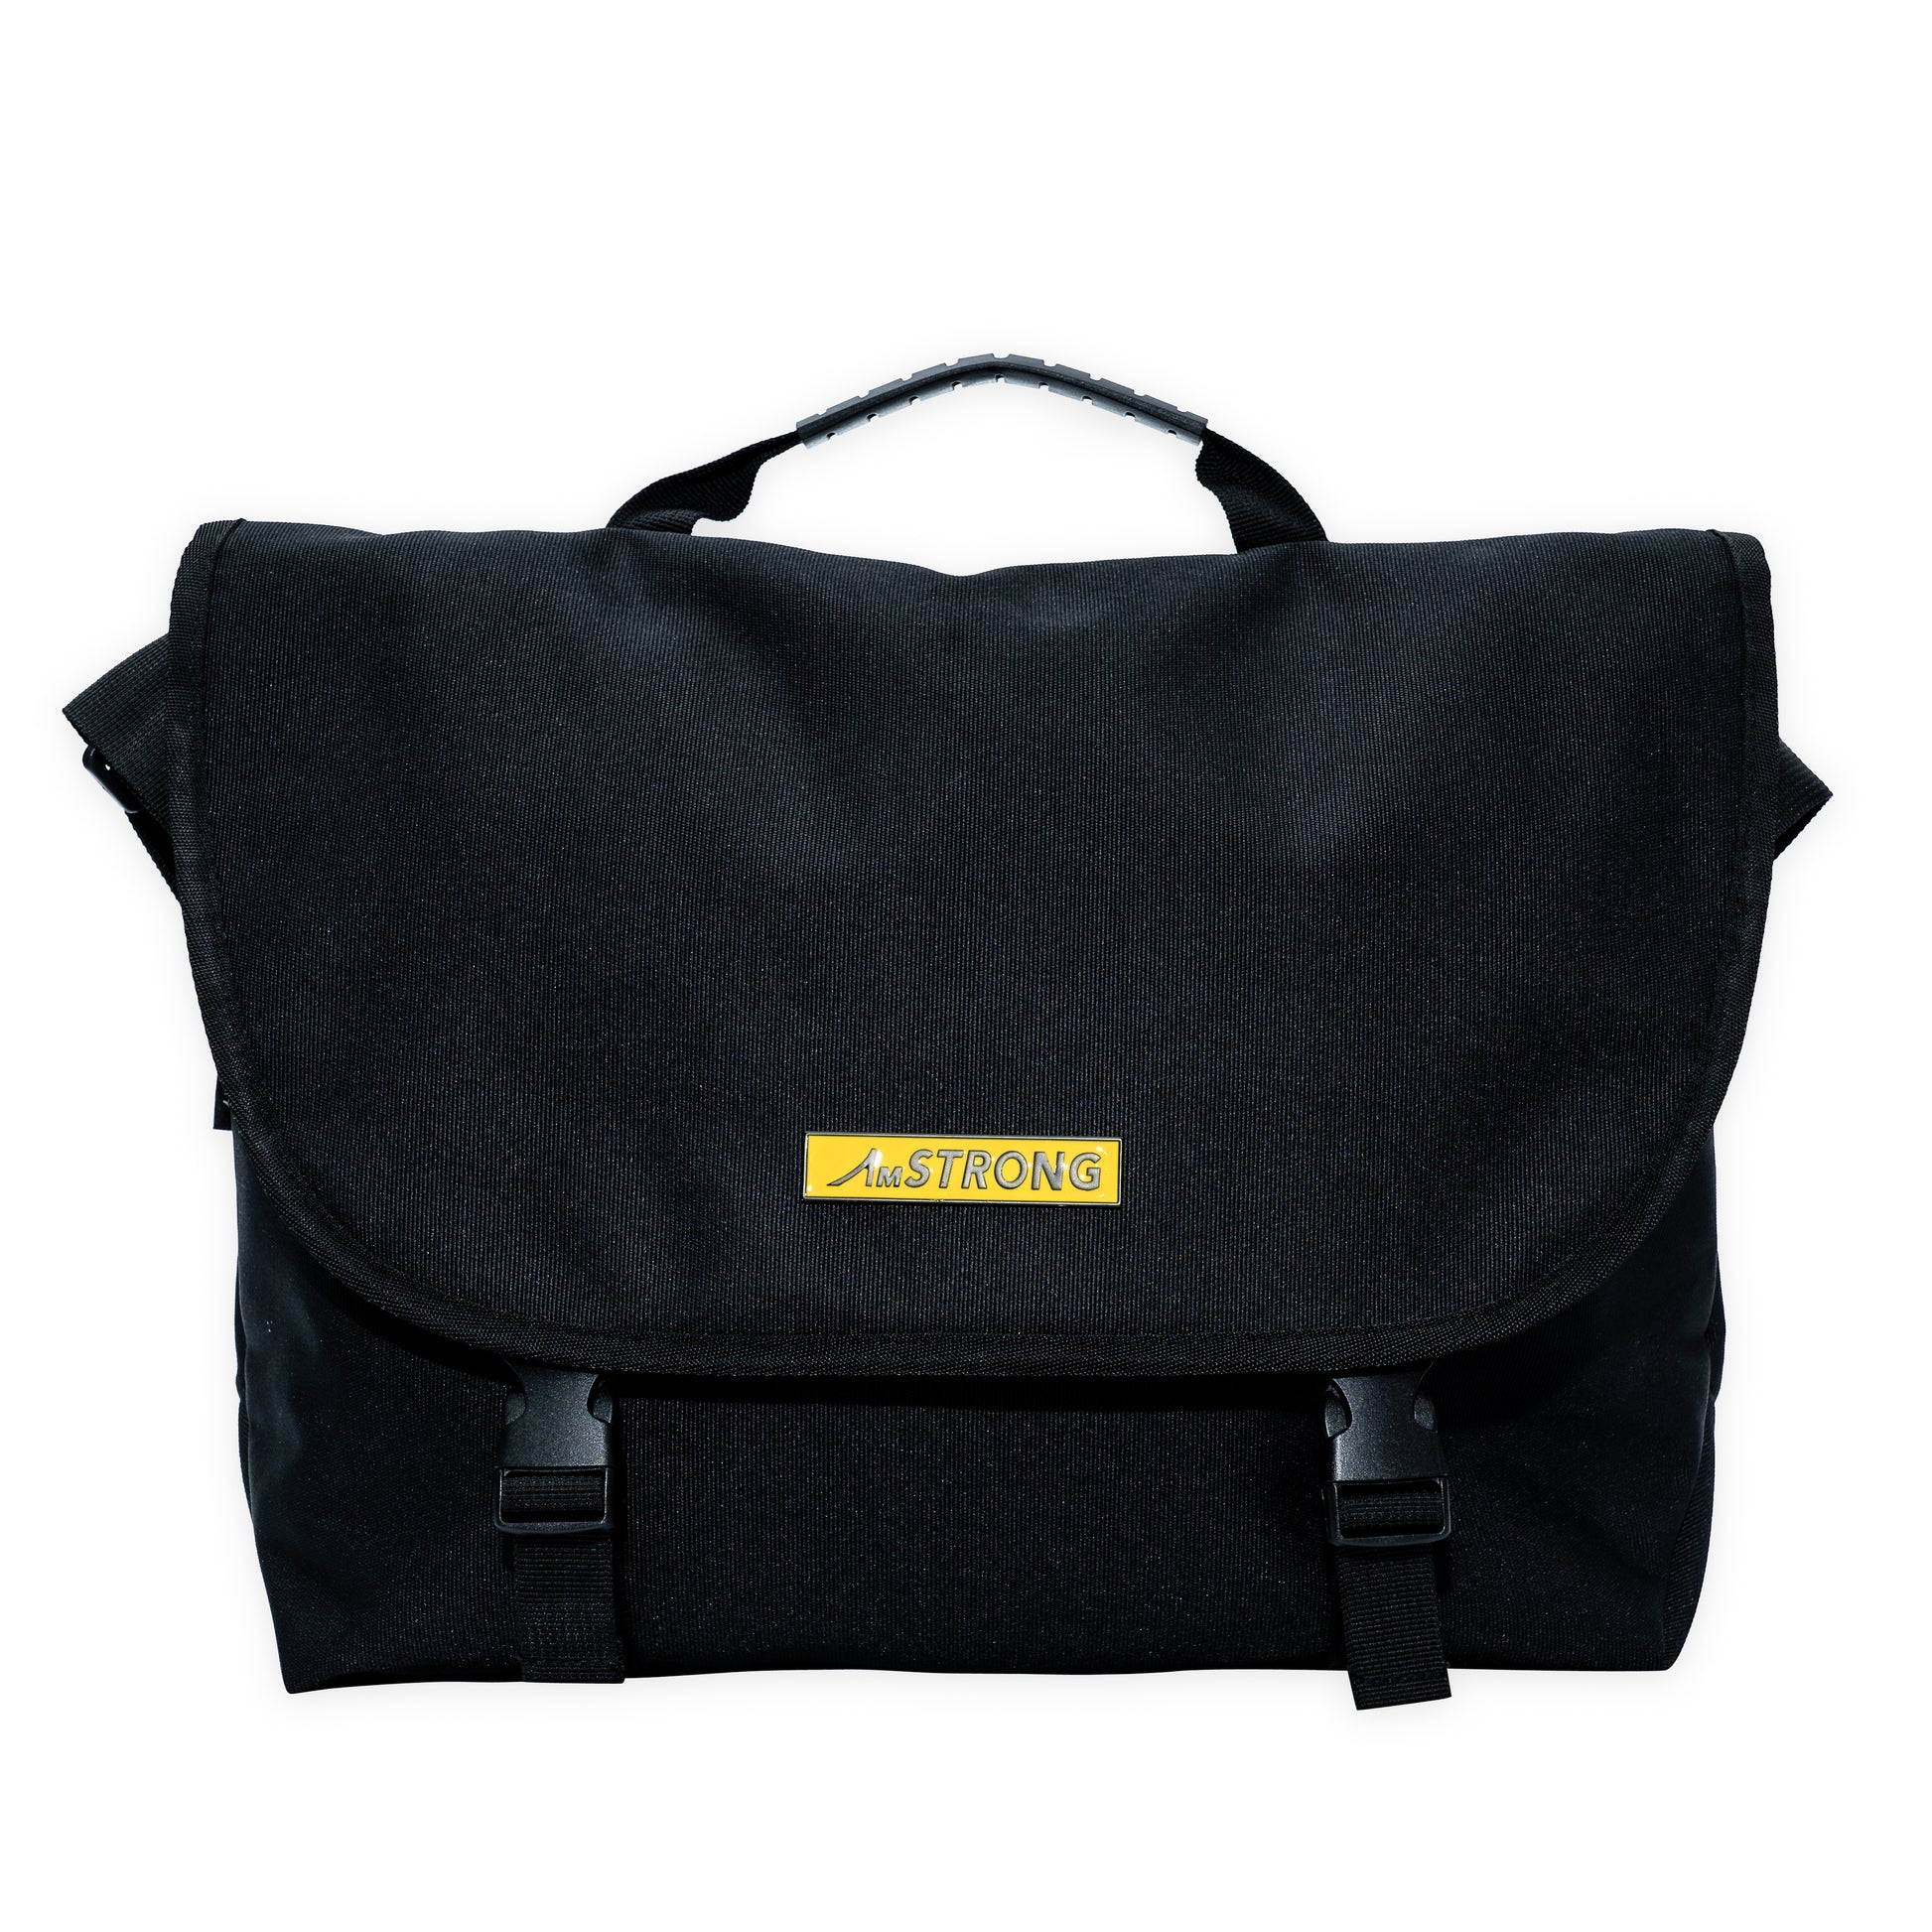 AmSTRONG black crossbody bag with a yellow metallic label